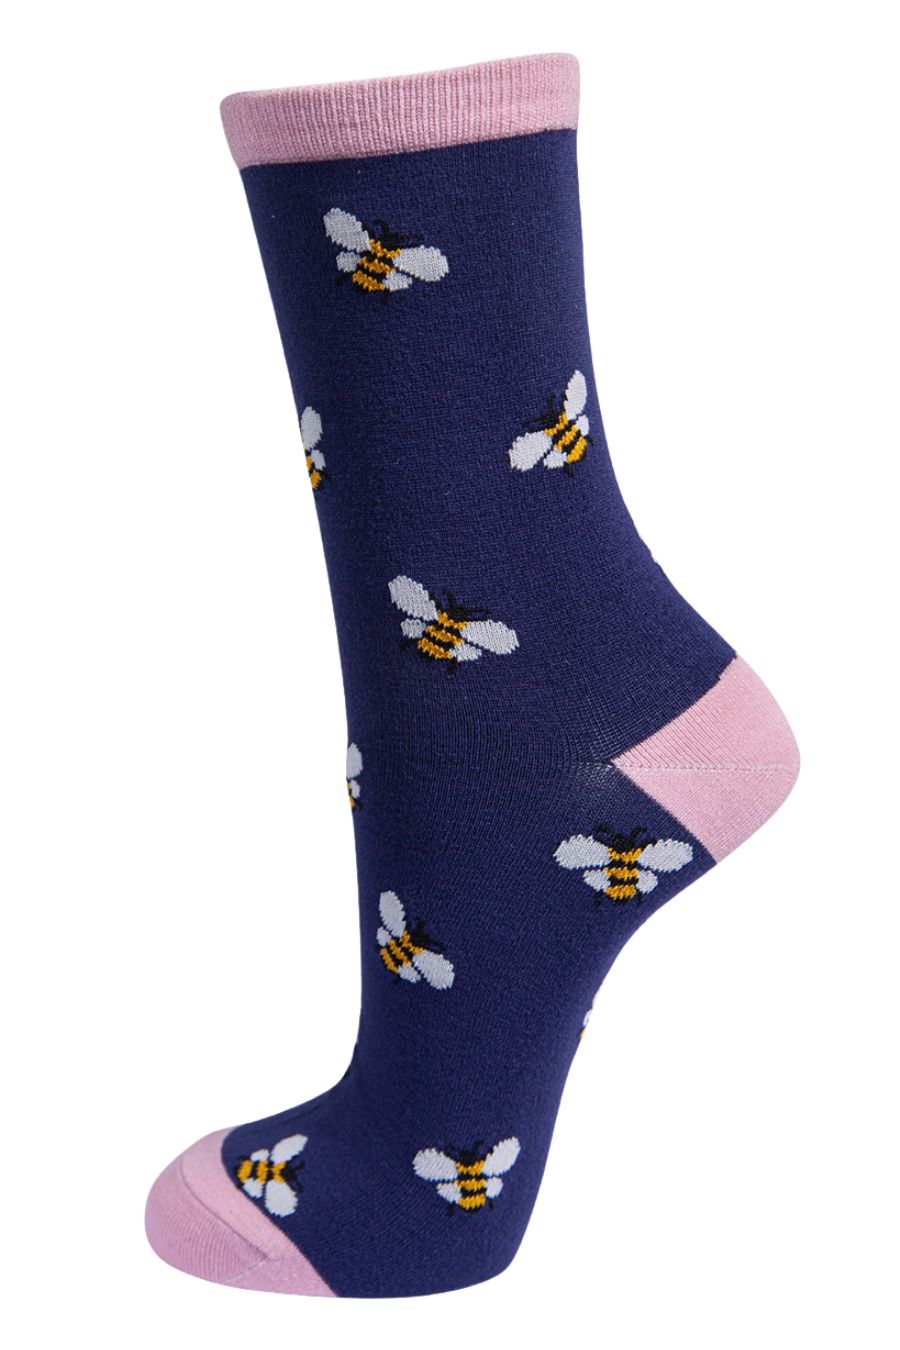 navy blue, pink ankle socks with all over bee pattern